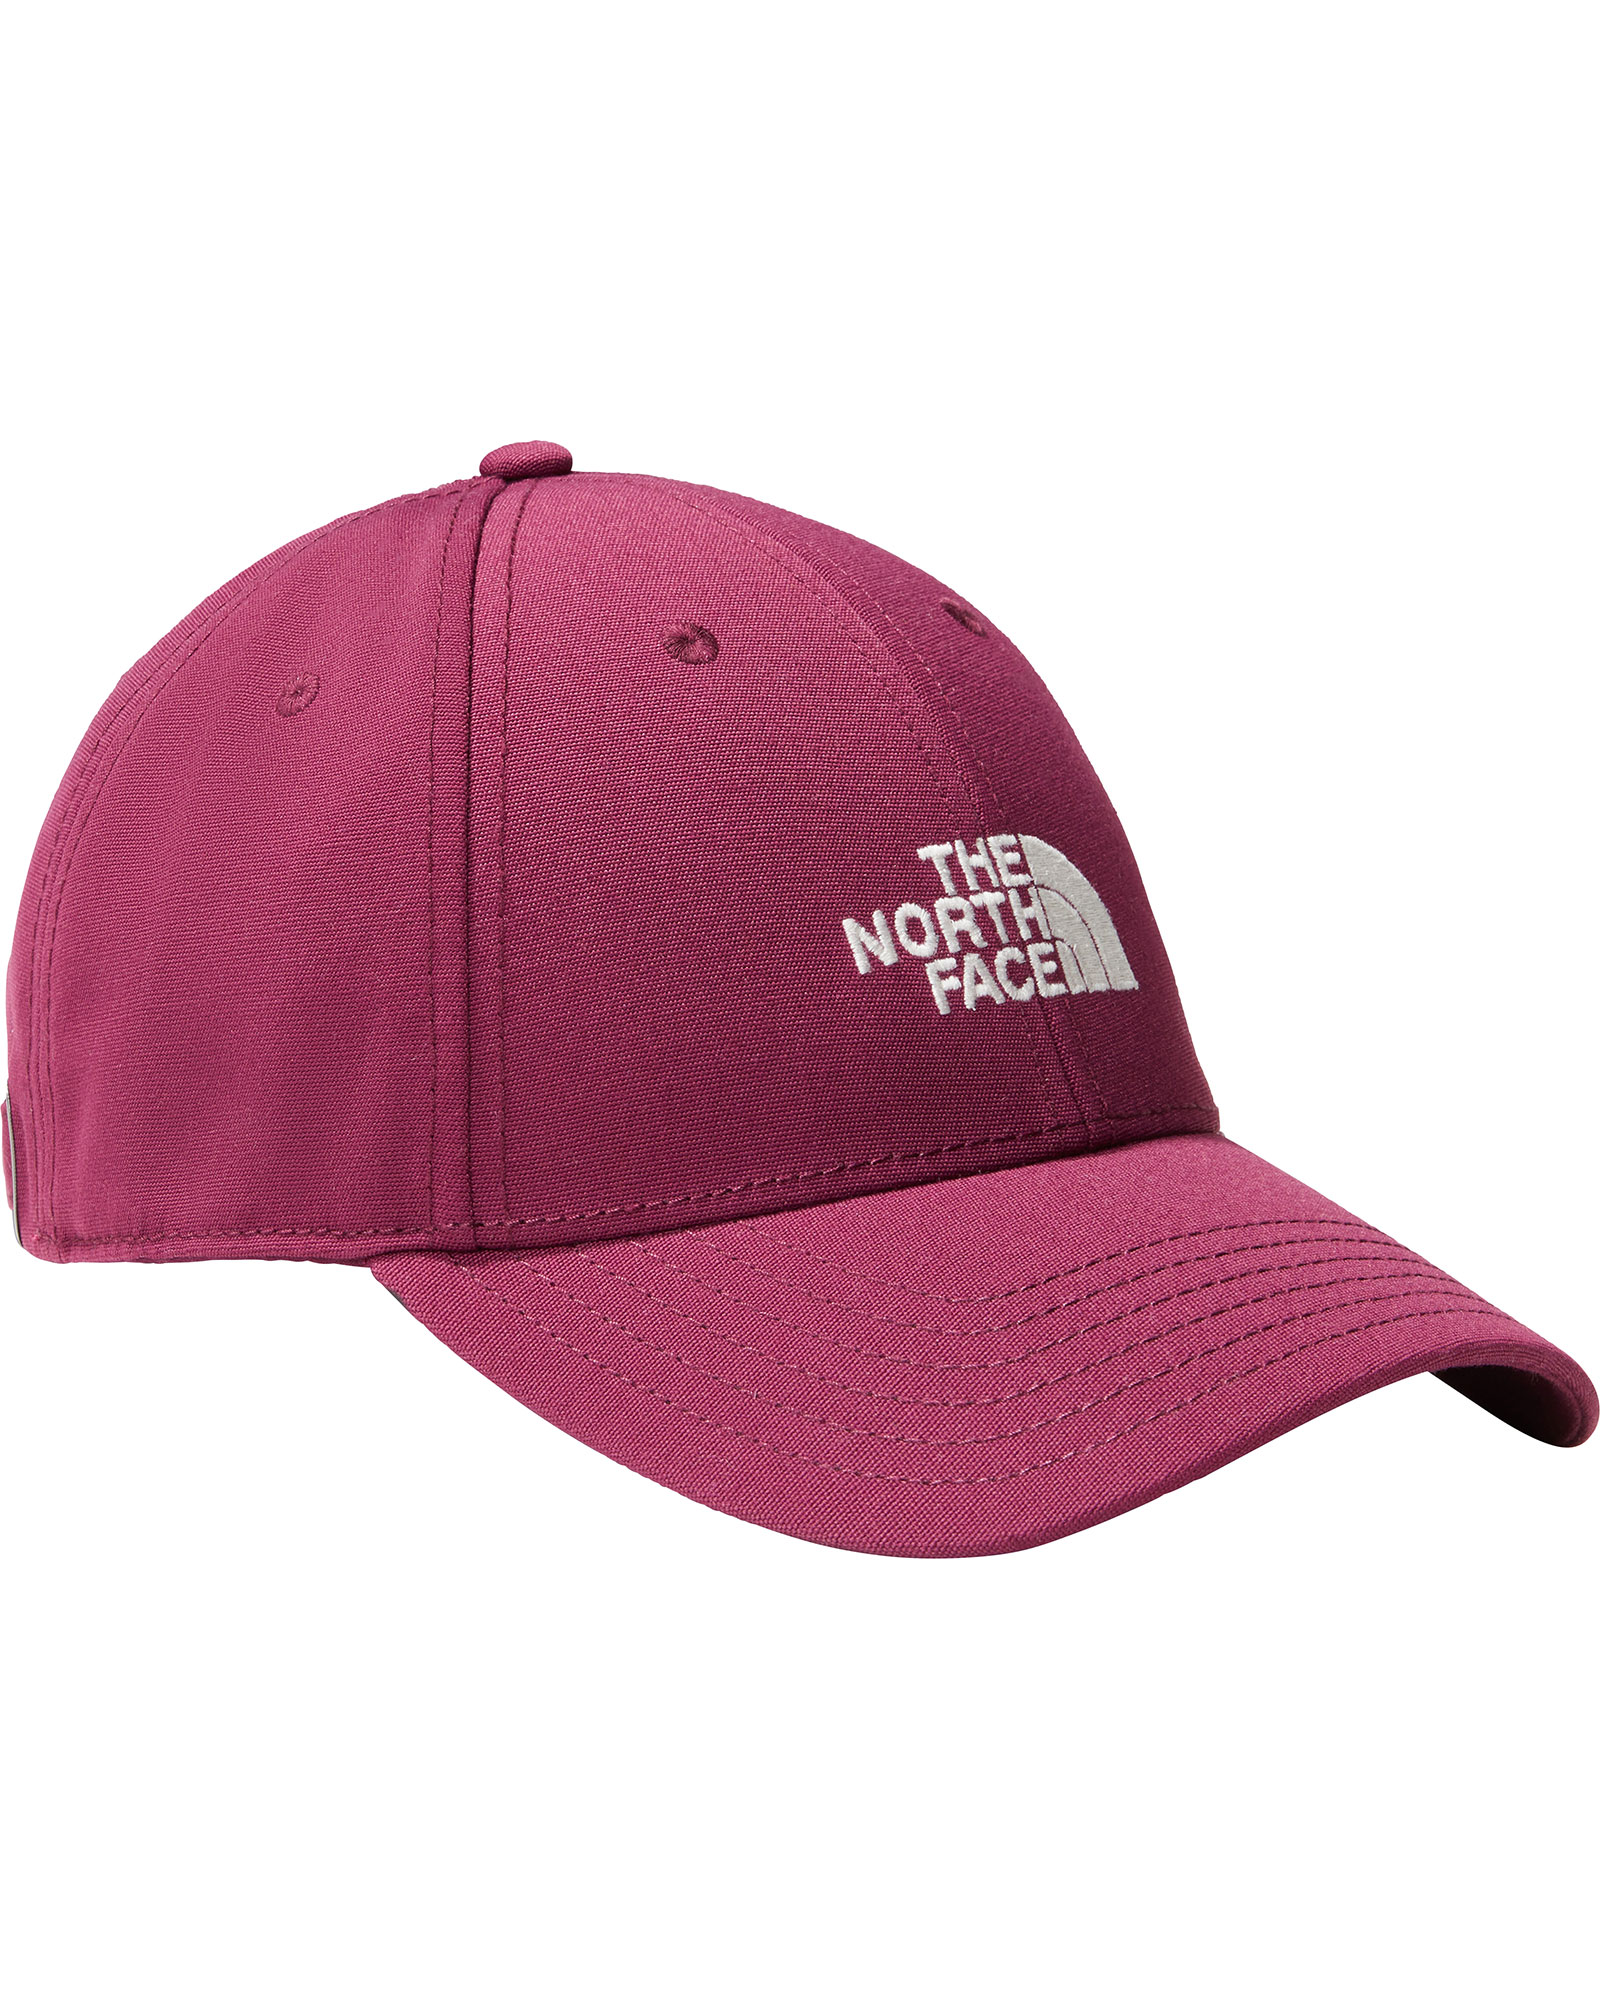 The North Face 66 Classic Logo Hat - Boysenberry